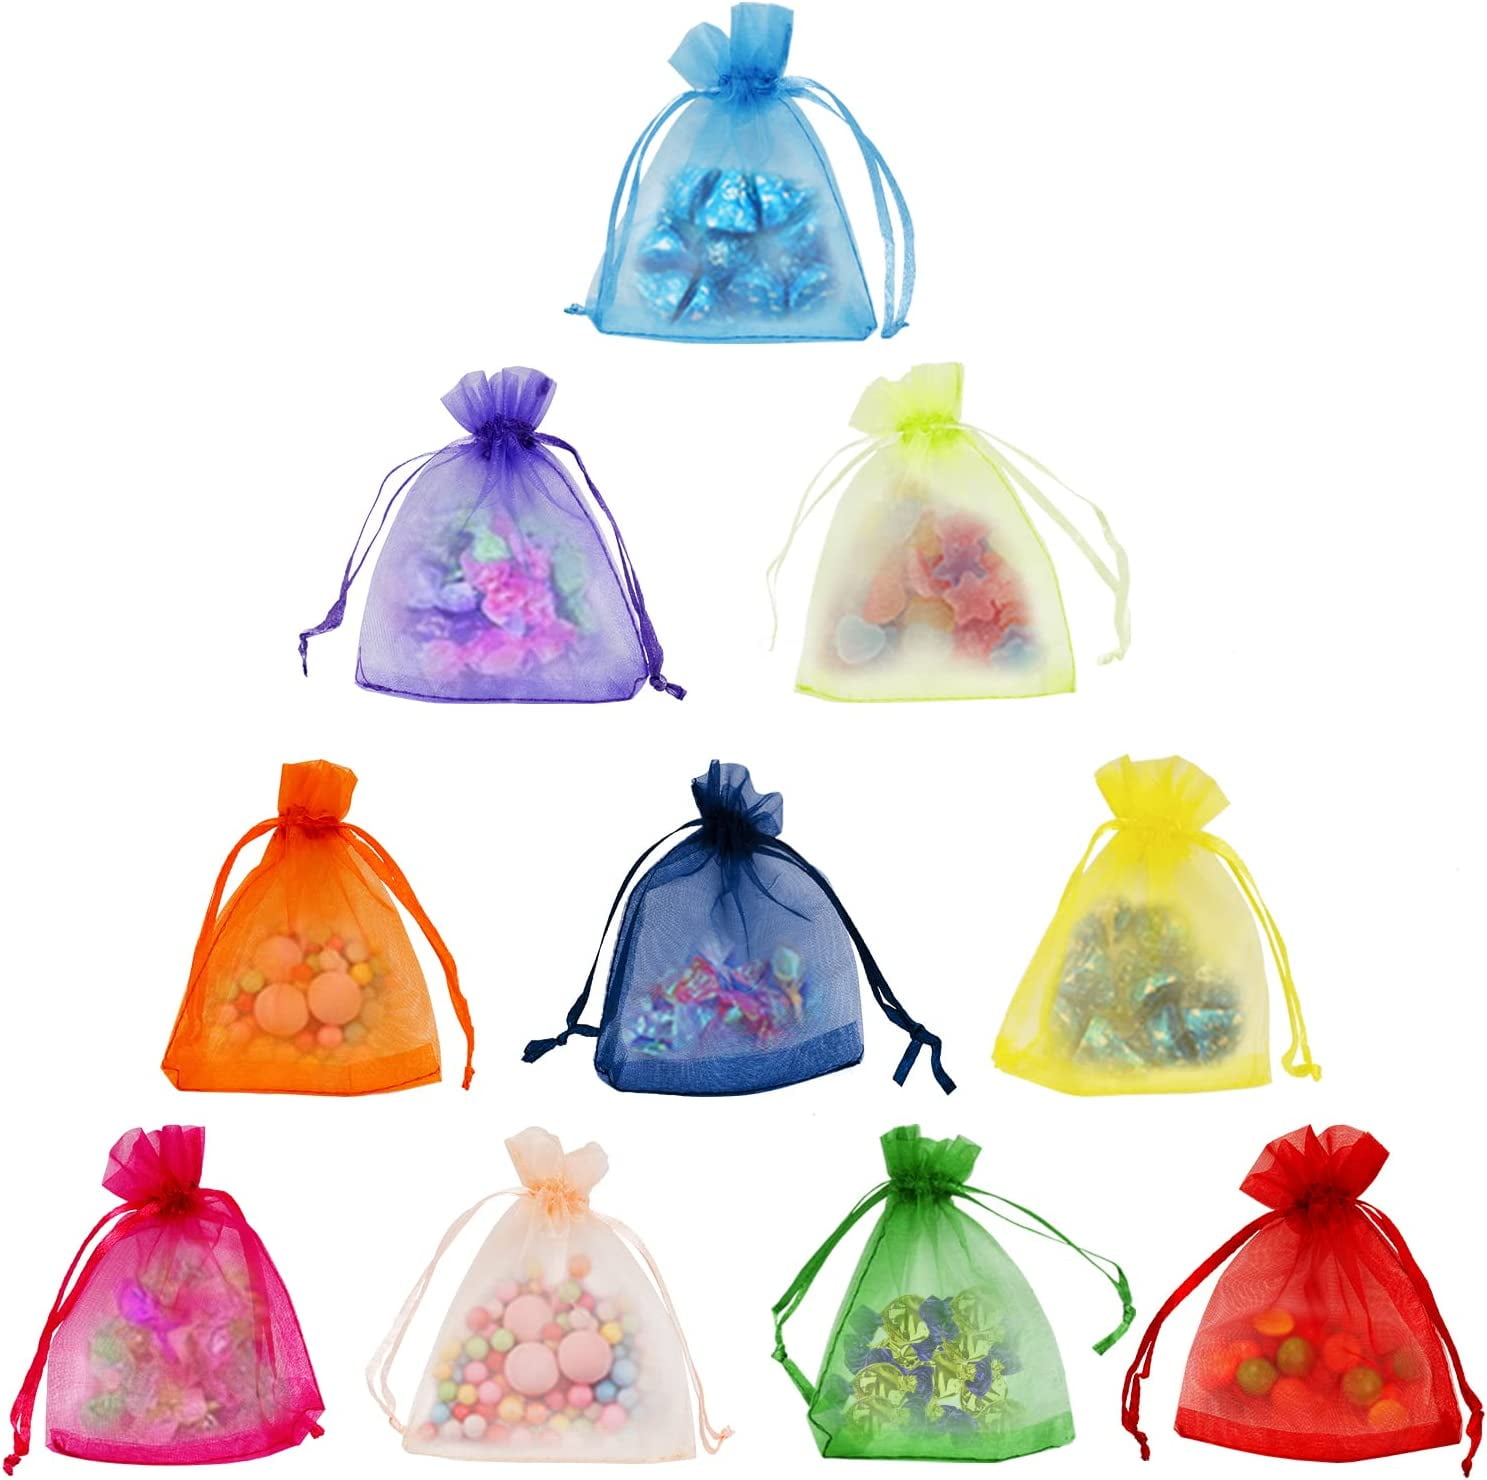 GOODTAKE 50PCS 2.7 x 3.5 Inches Gifts Drawstring Bags Pouch Small Jewelry  Bags for Party Wedding Favor Party Festival Bags (Pack of 50 Pcs)